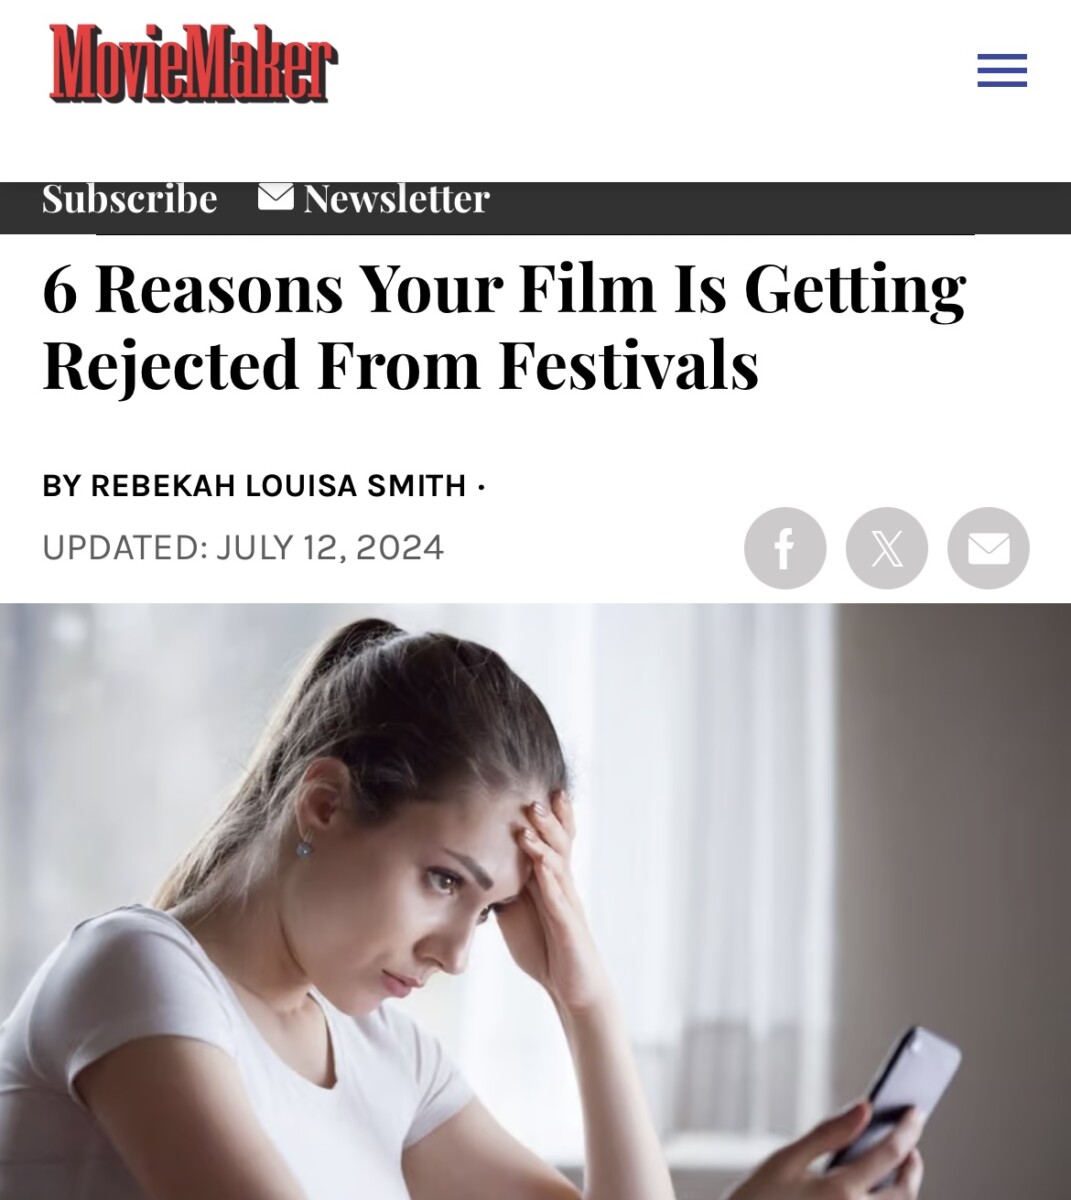 6 Reasons Your Film Is Getting Rejected From Festivals